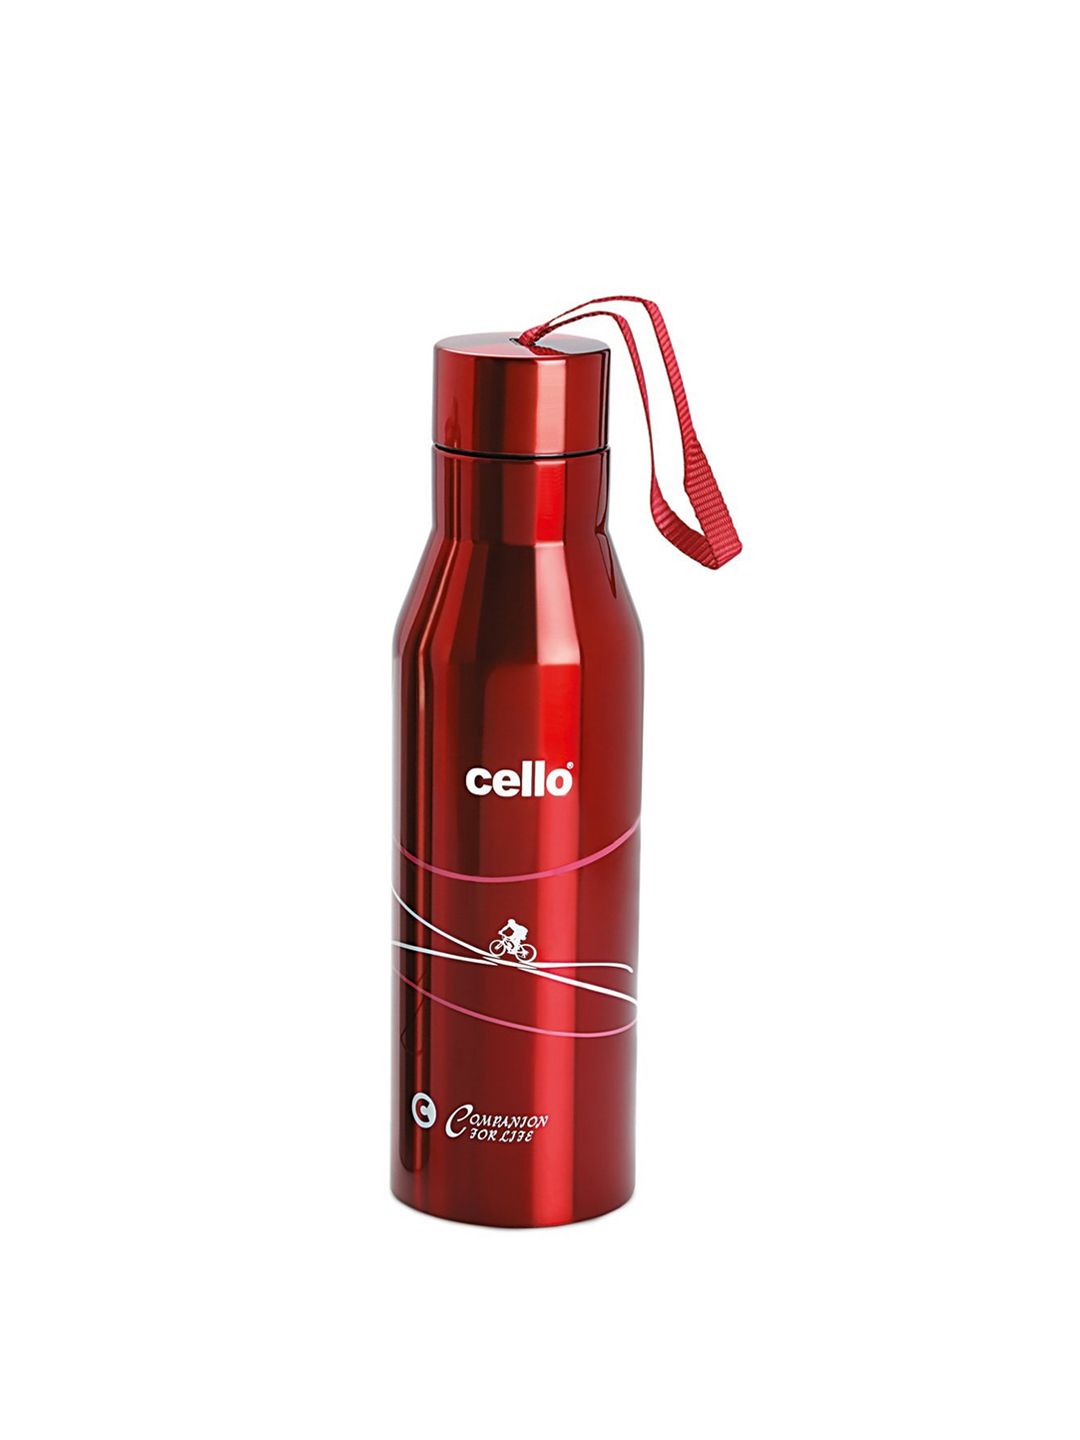 Cello Red & White Printed Stainless Steel Water Bottle 750 ml Price in India